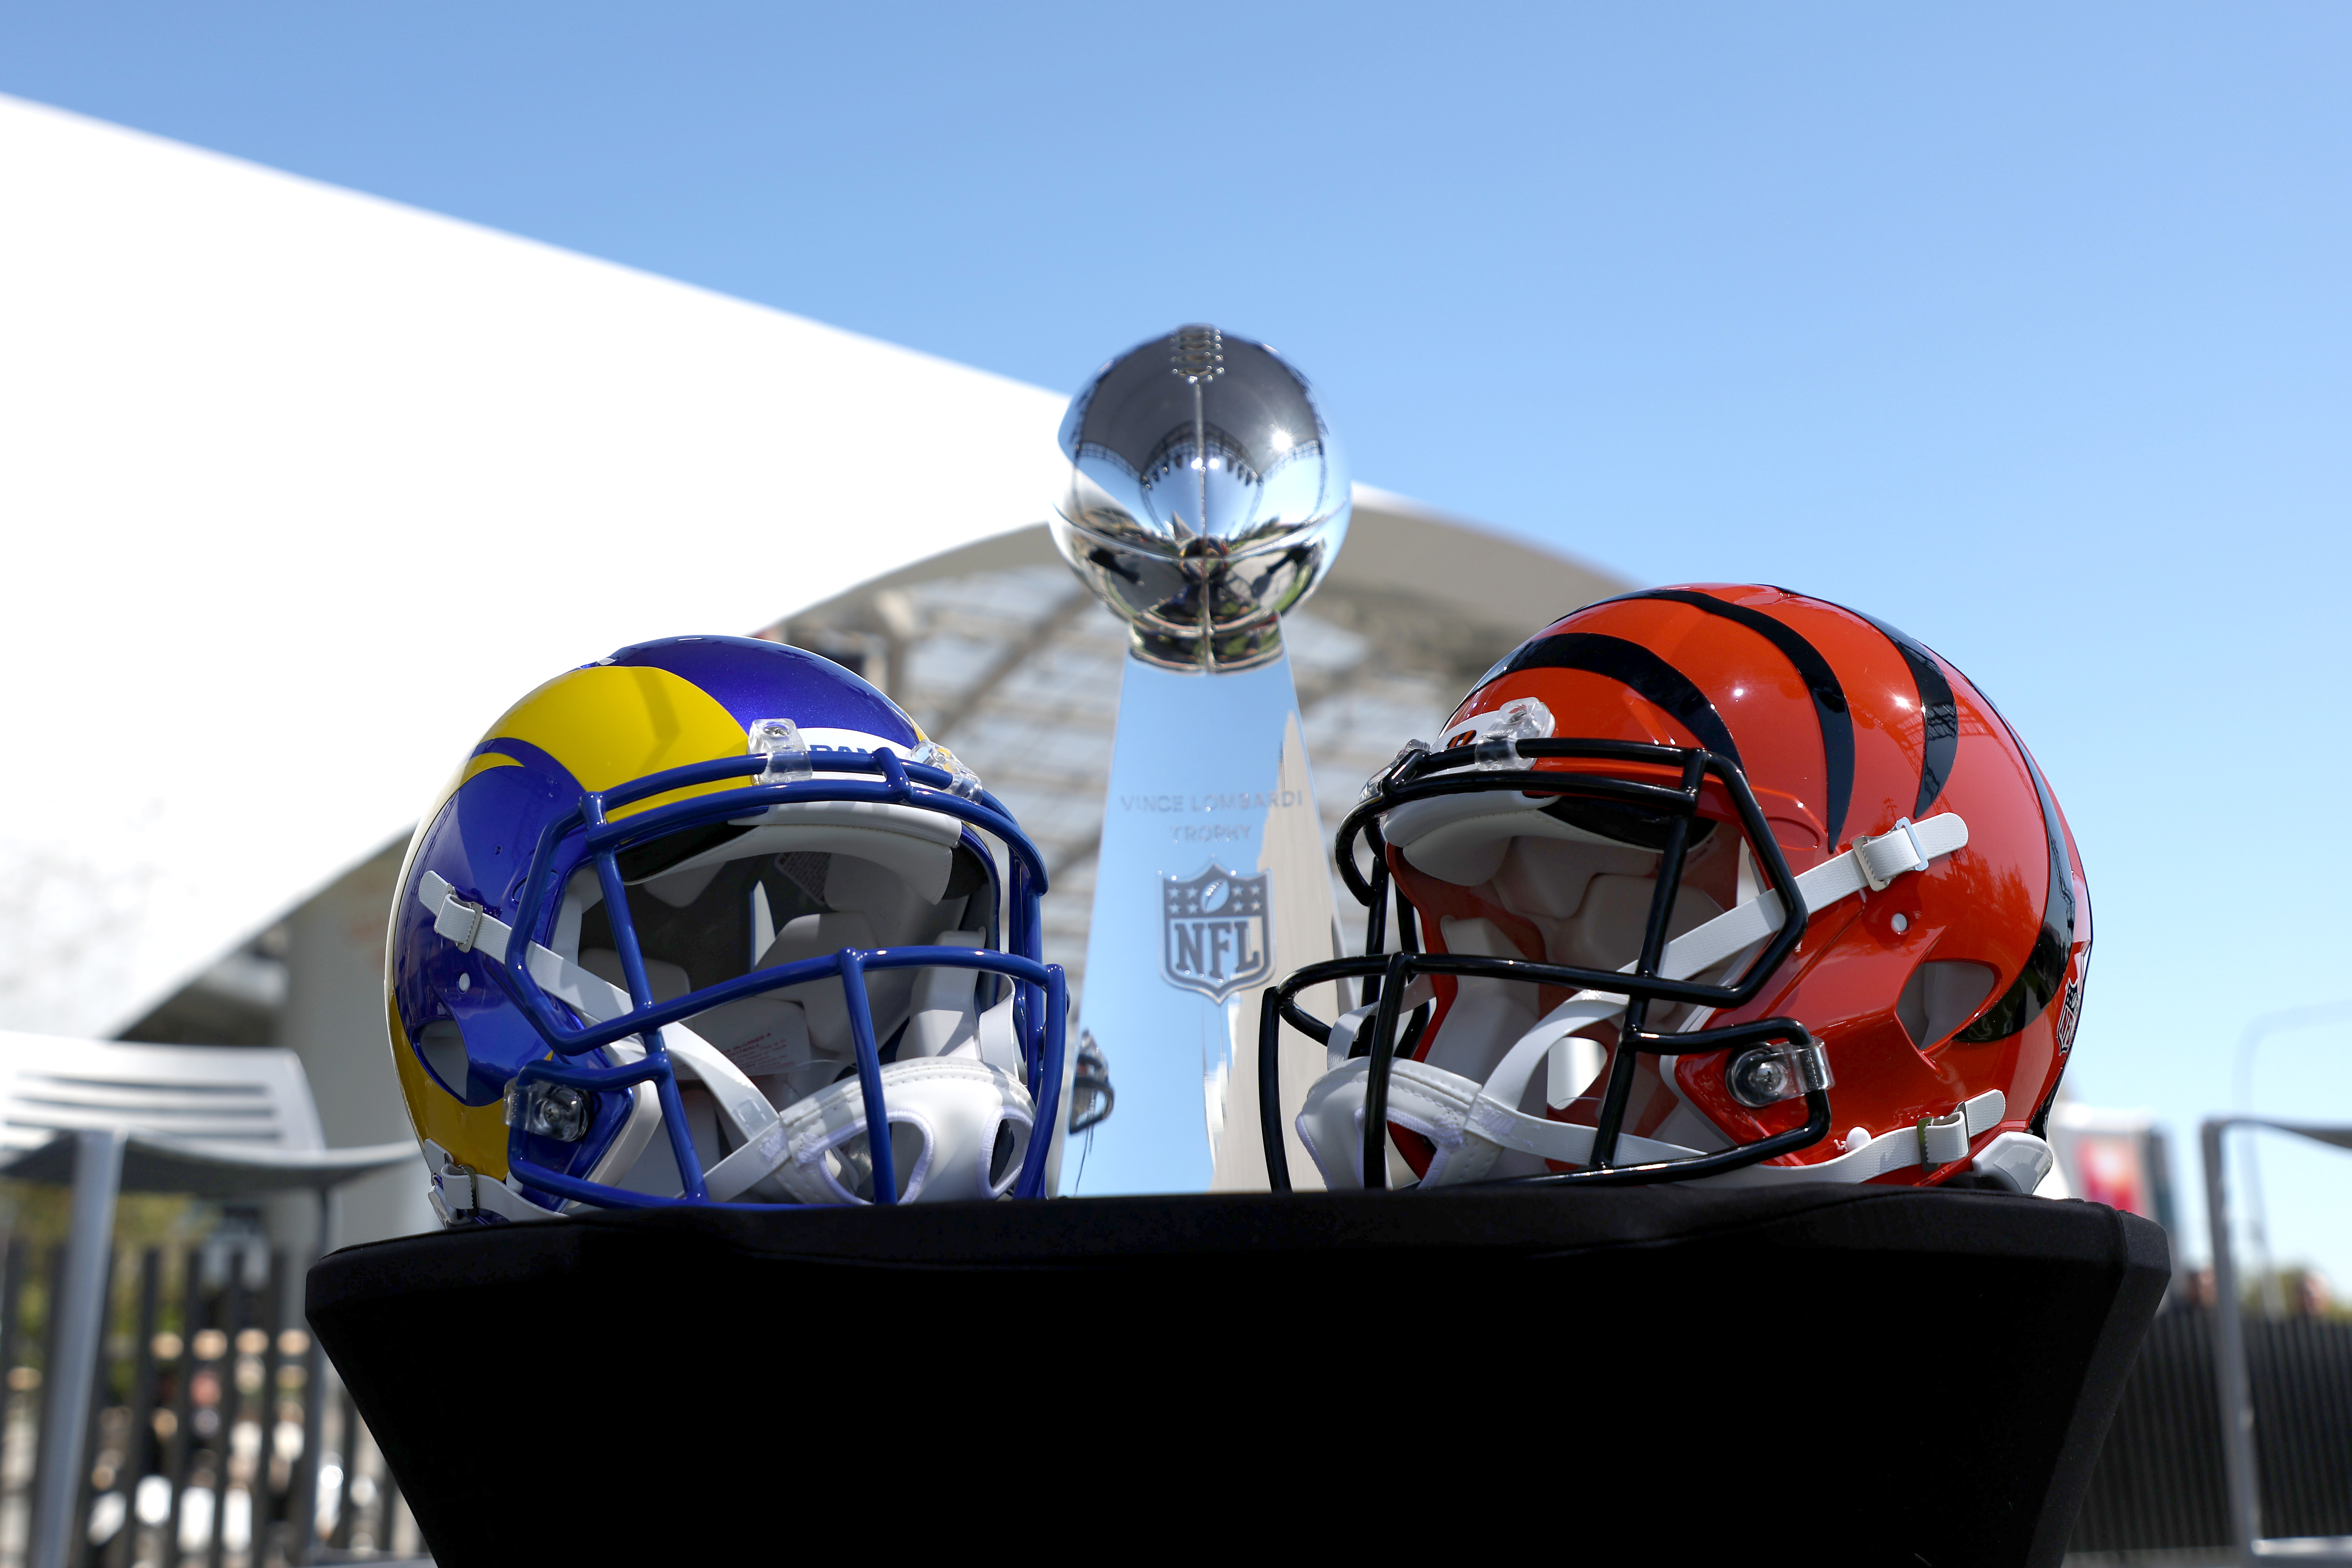 Who Won the Super Bowl? Rams vs Bengals Who's Playing, Results, Score, Quarter-by-Quarter Points